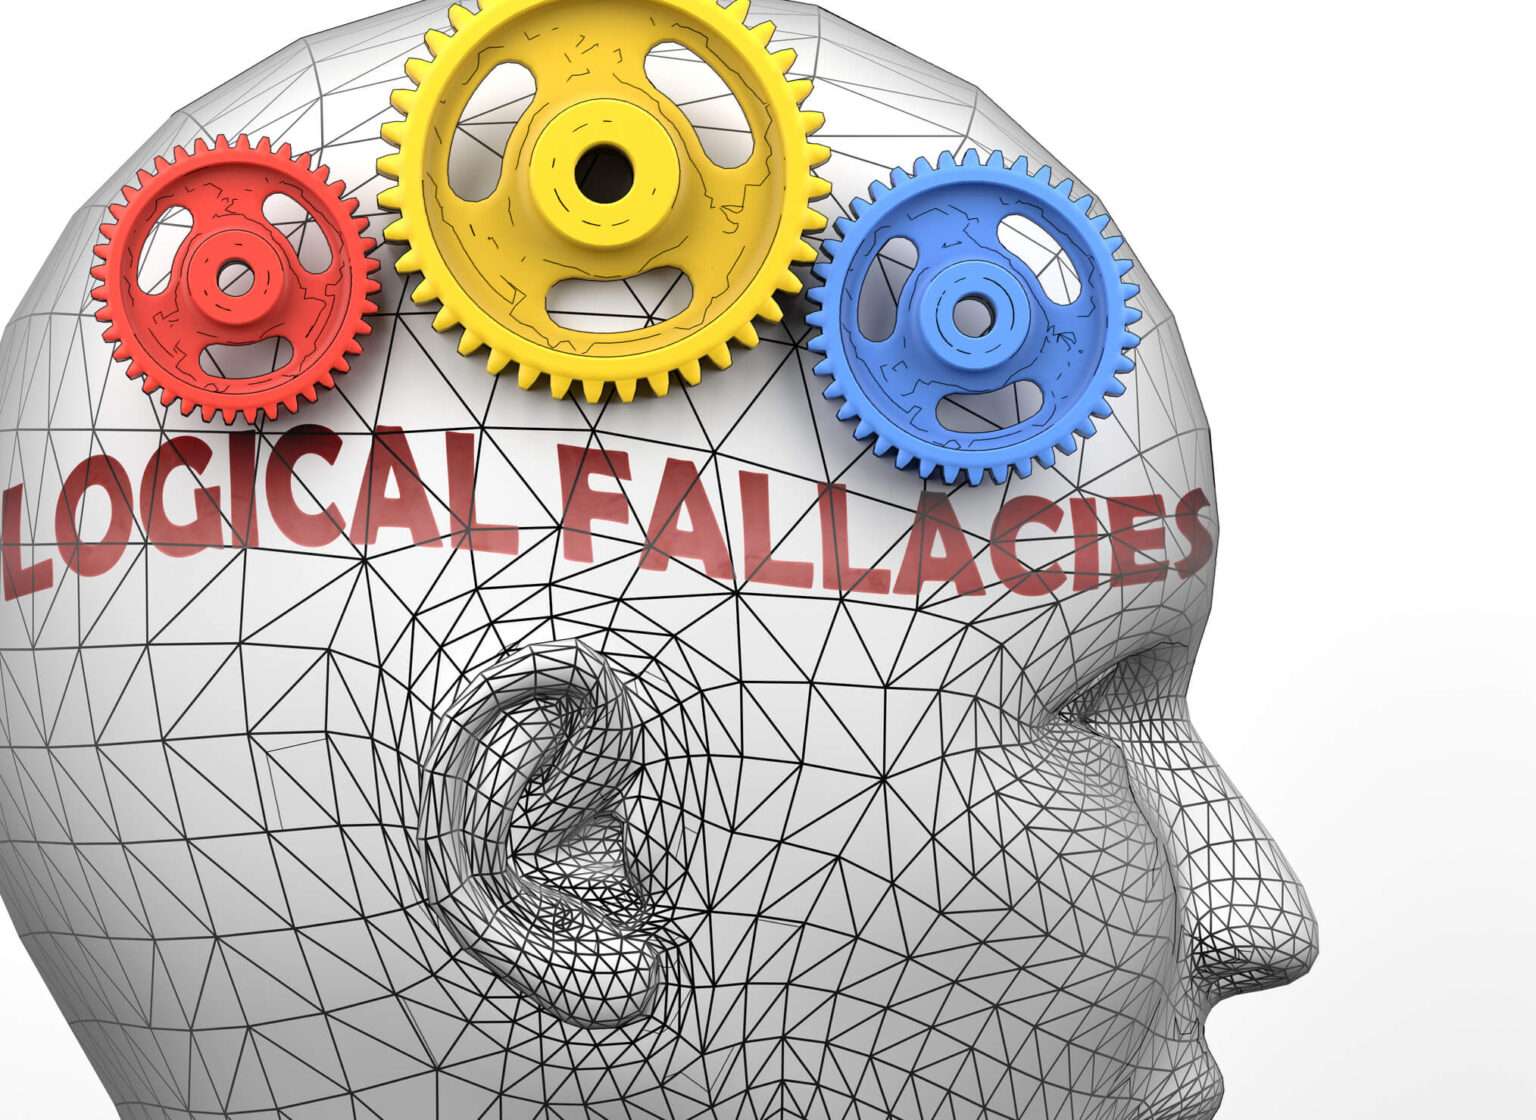 Top 10 Examples of Fallacies in Advertising